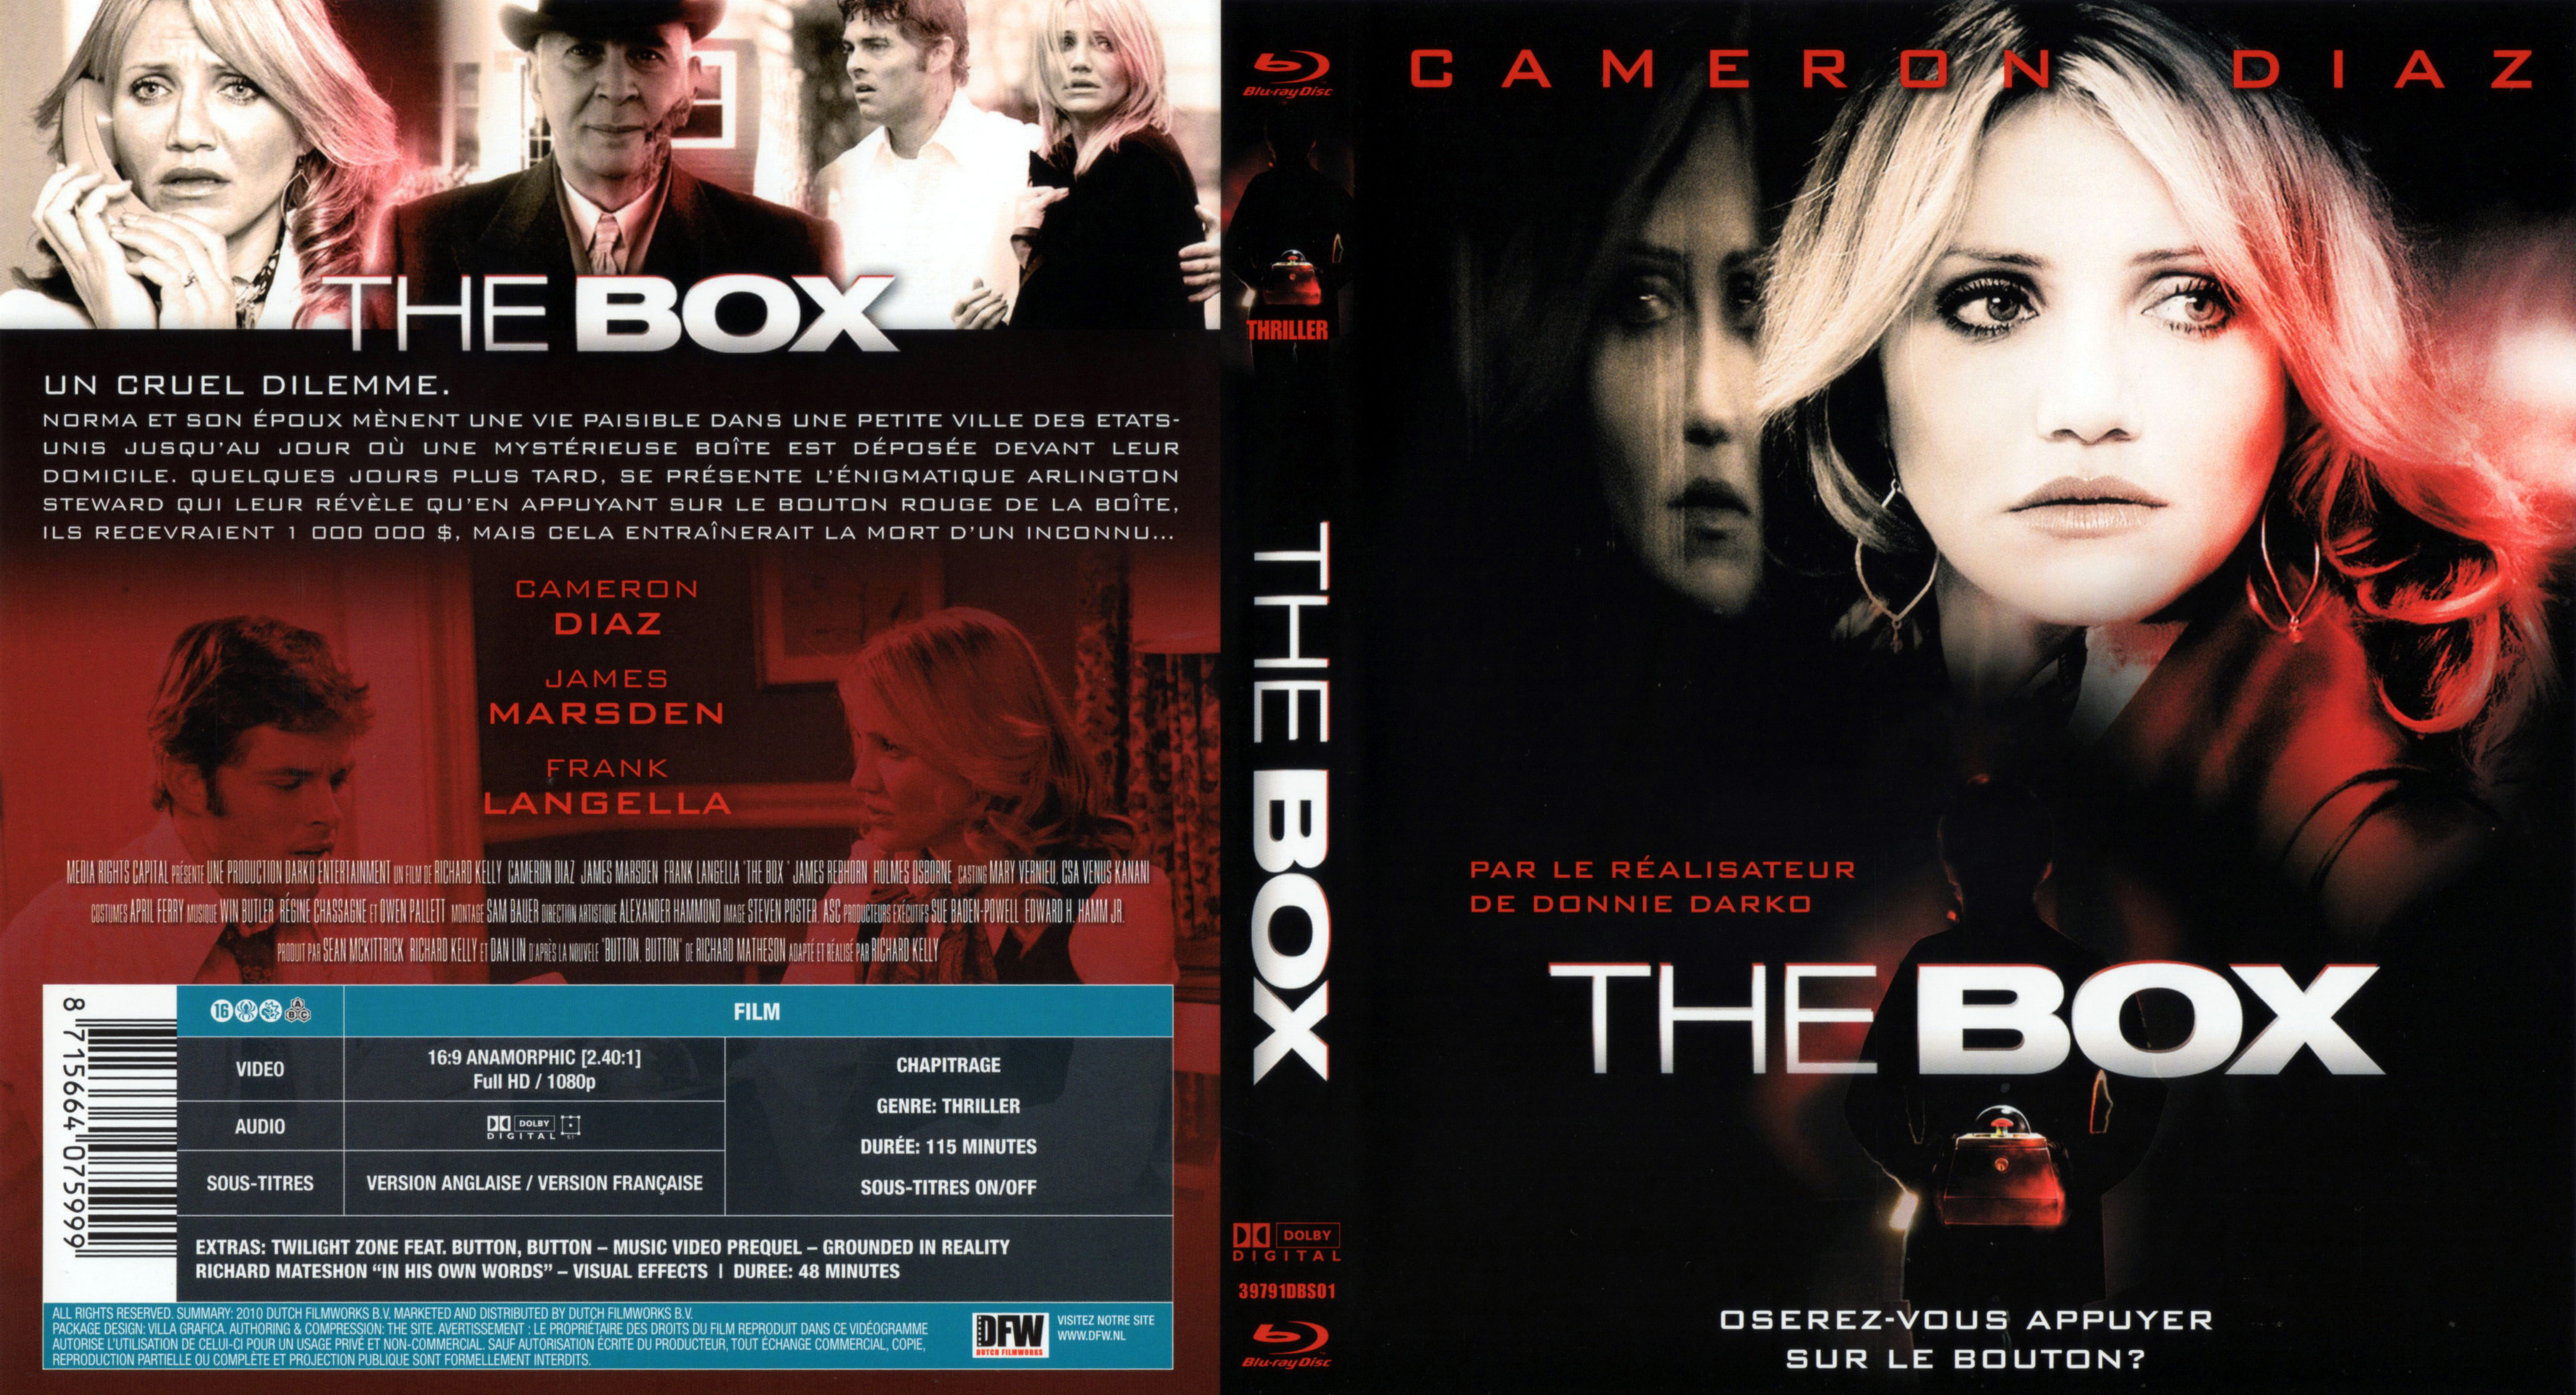 Jaquette DVD The box (BLU-RAY)